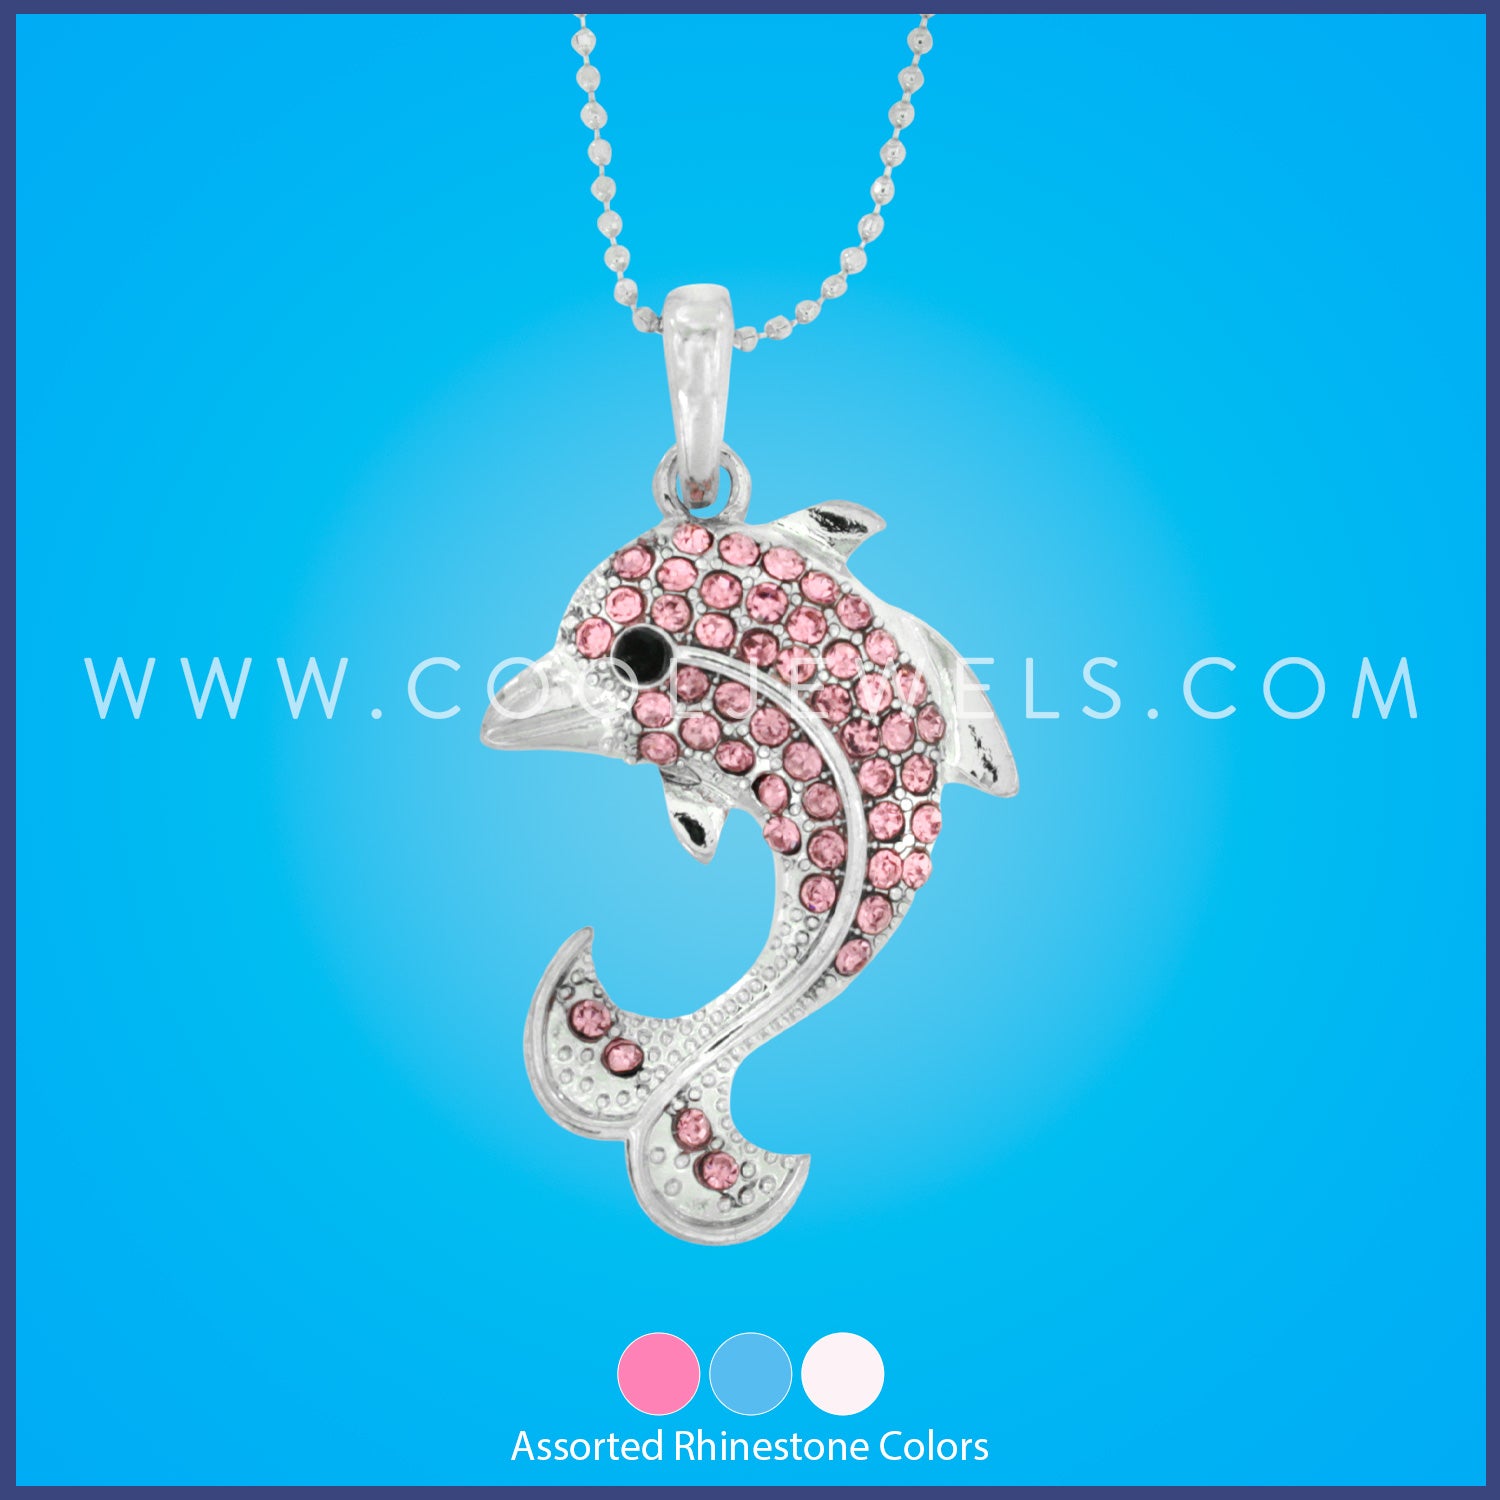 SILVER BALL CHAIN NECKLACE WITH RHINESTONE DOLPHIN - ASSORTED